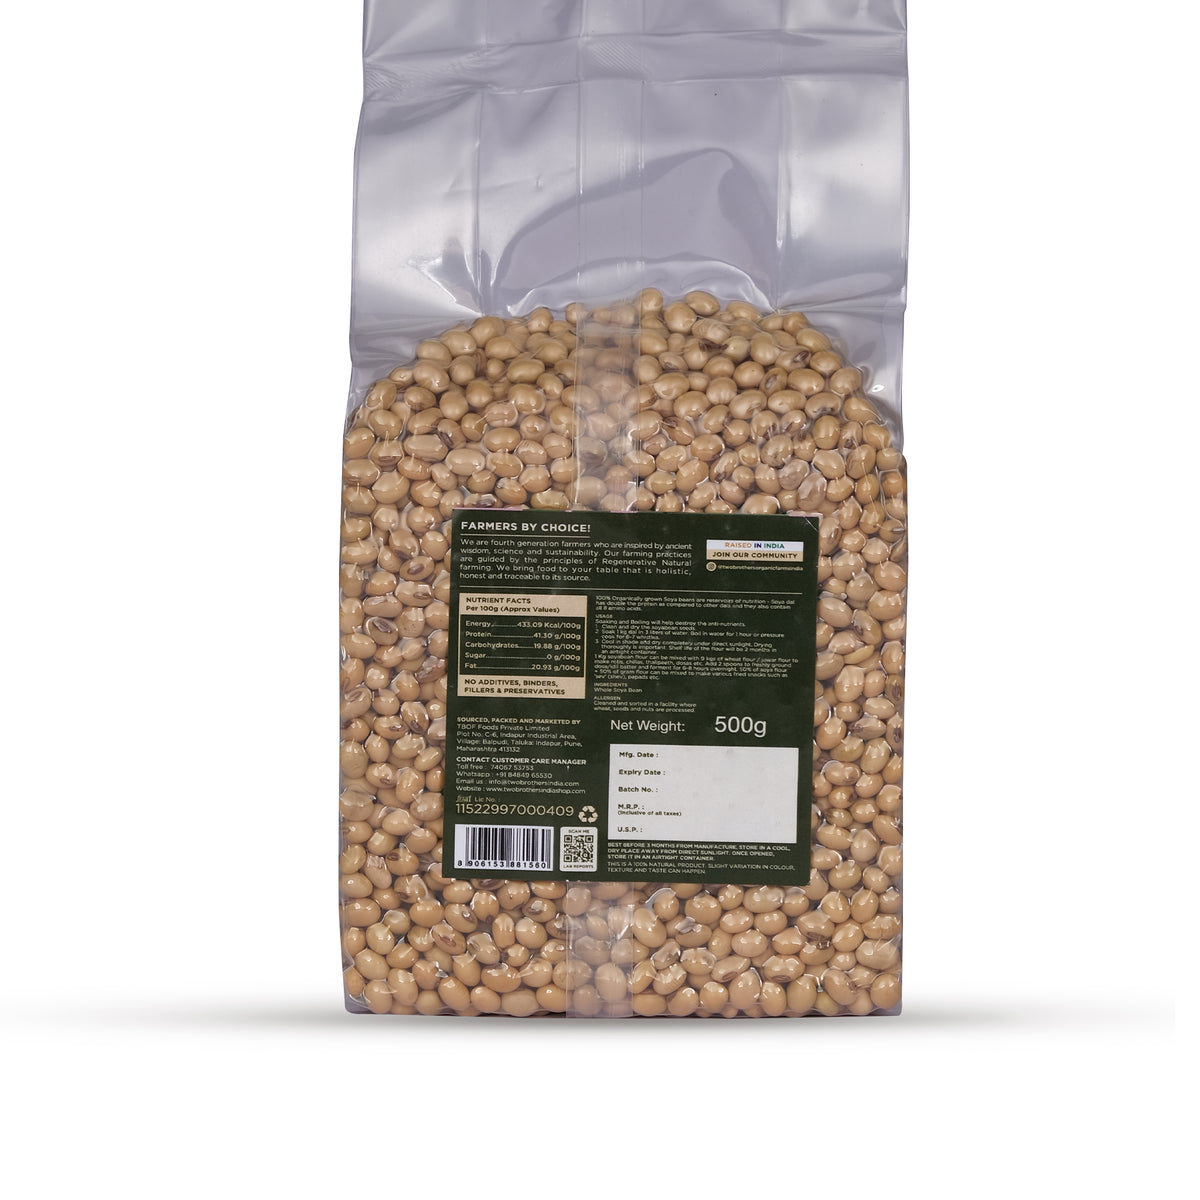 Whole Soya Beans, High Protein